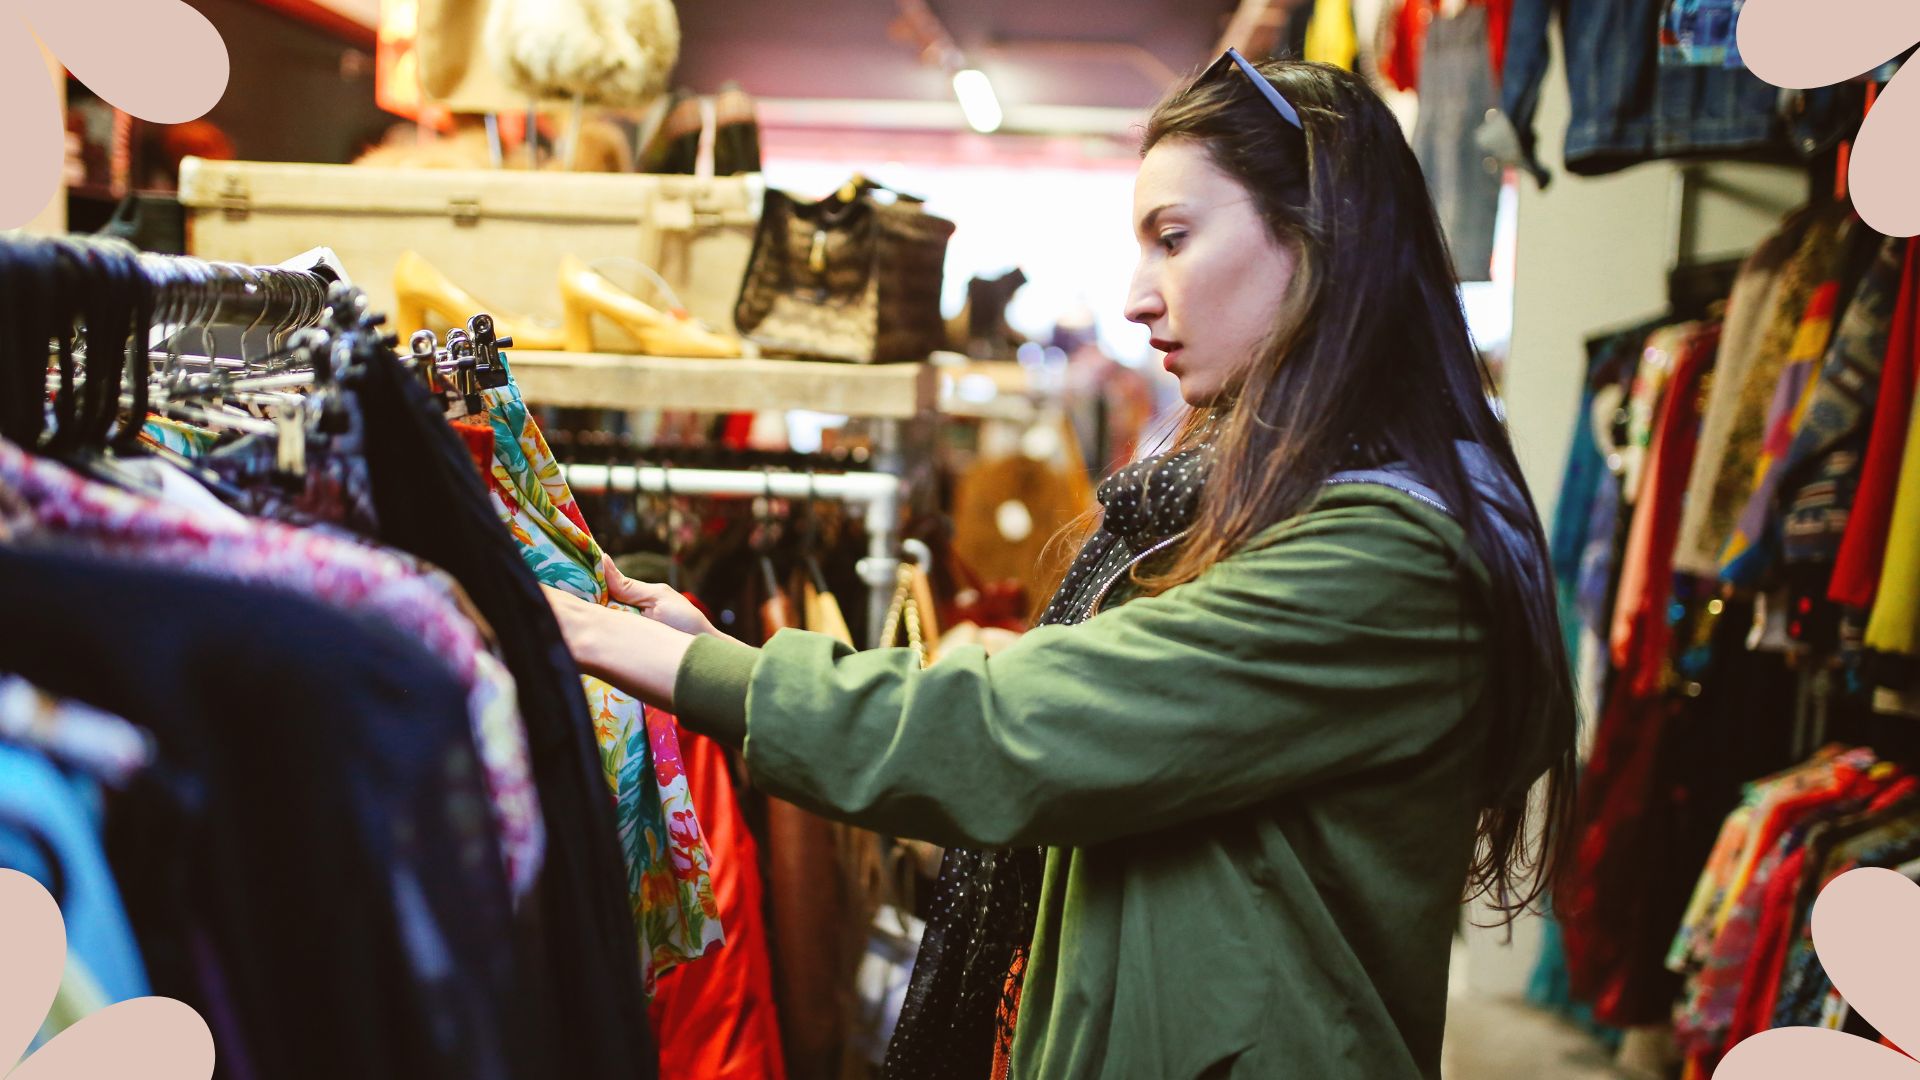 How to shop sustainably, according to experts | Woman & Home